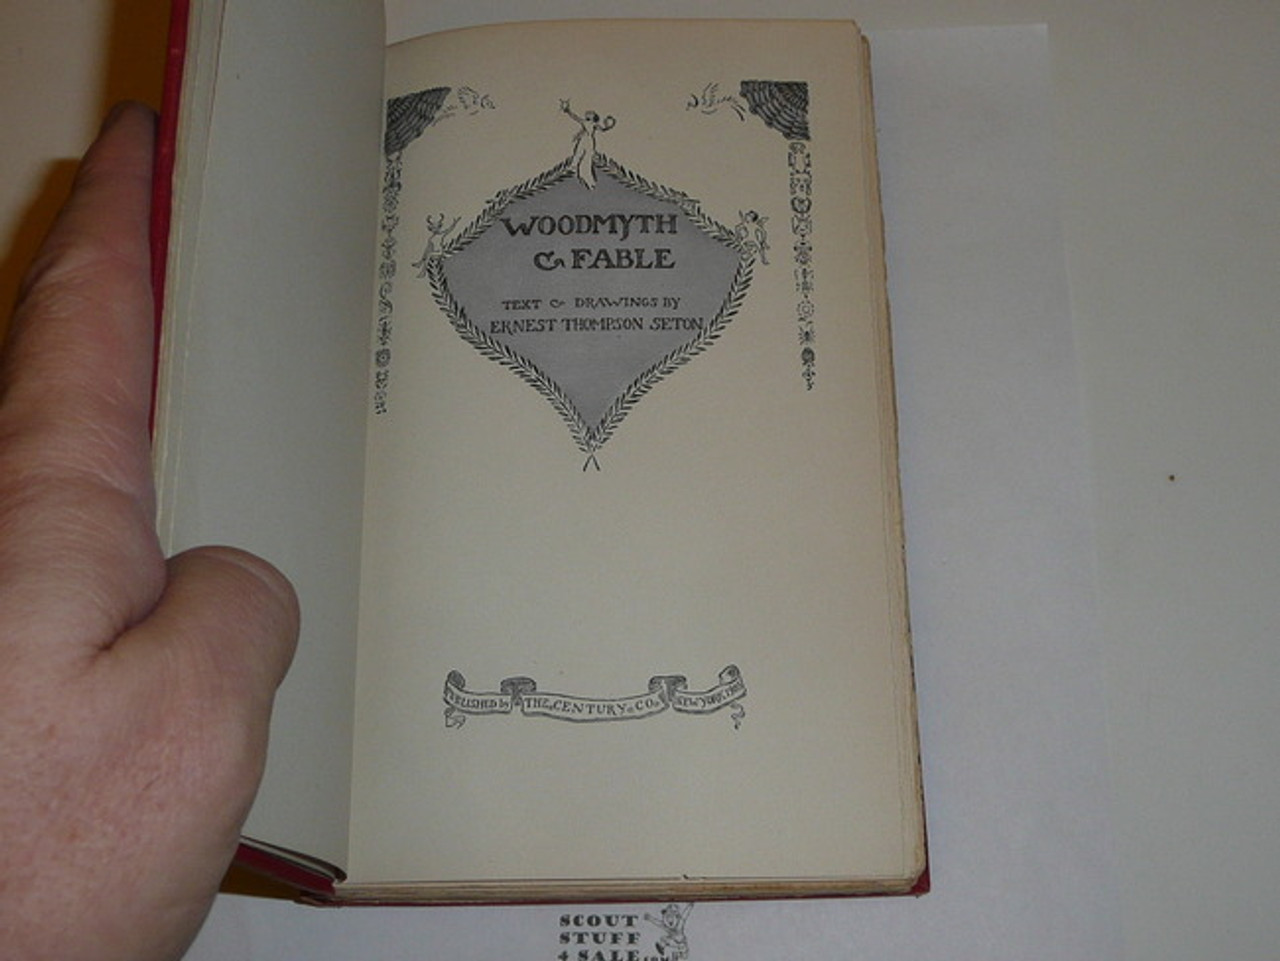 1905 Woodmyth & Fable, By Ernest Thompson Seton, First printing